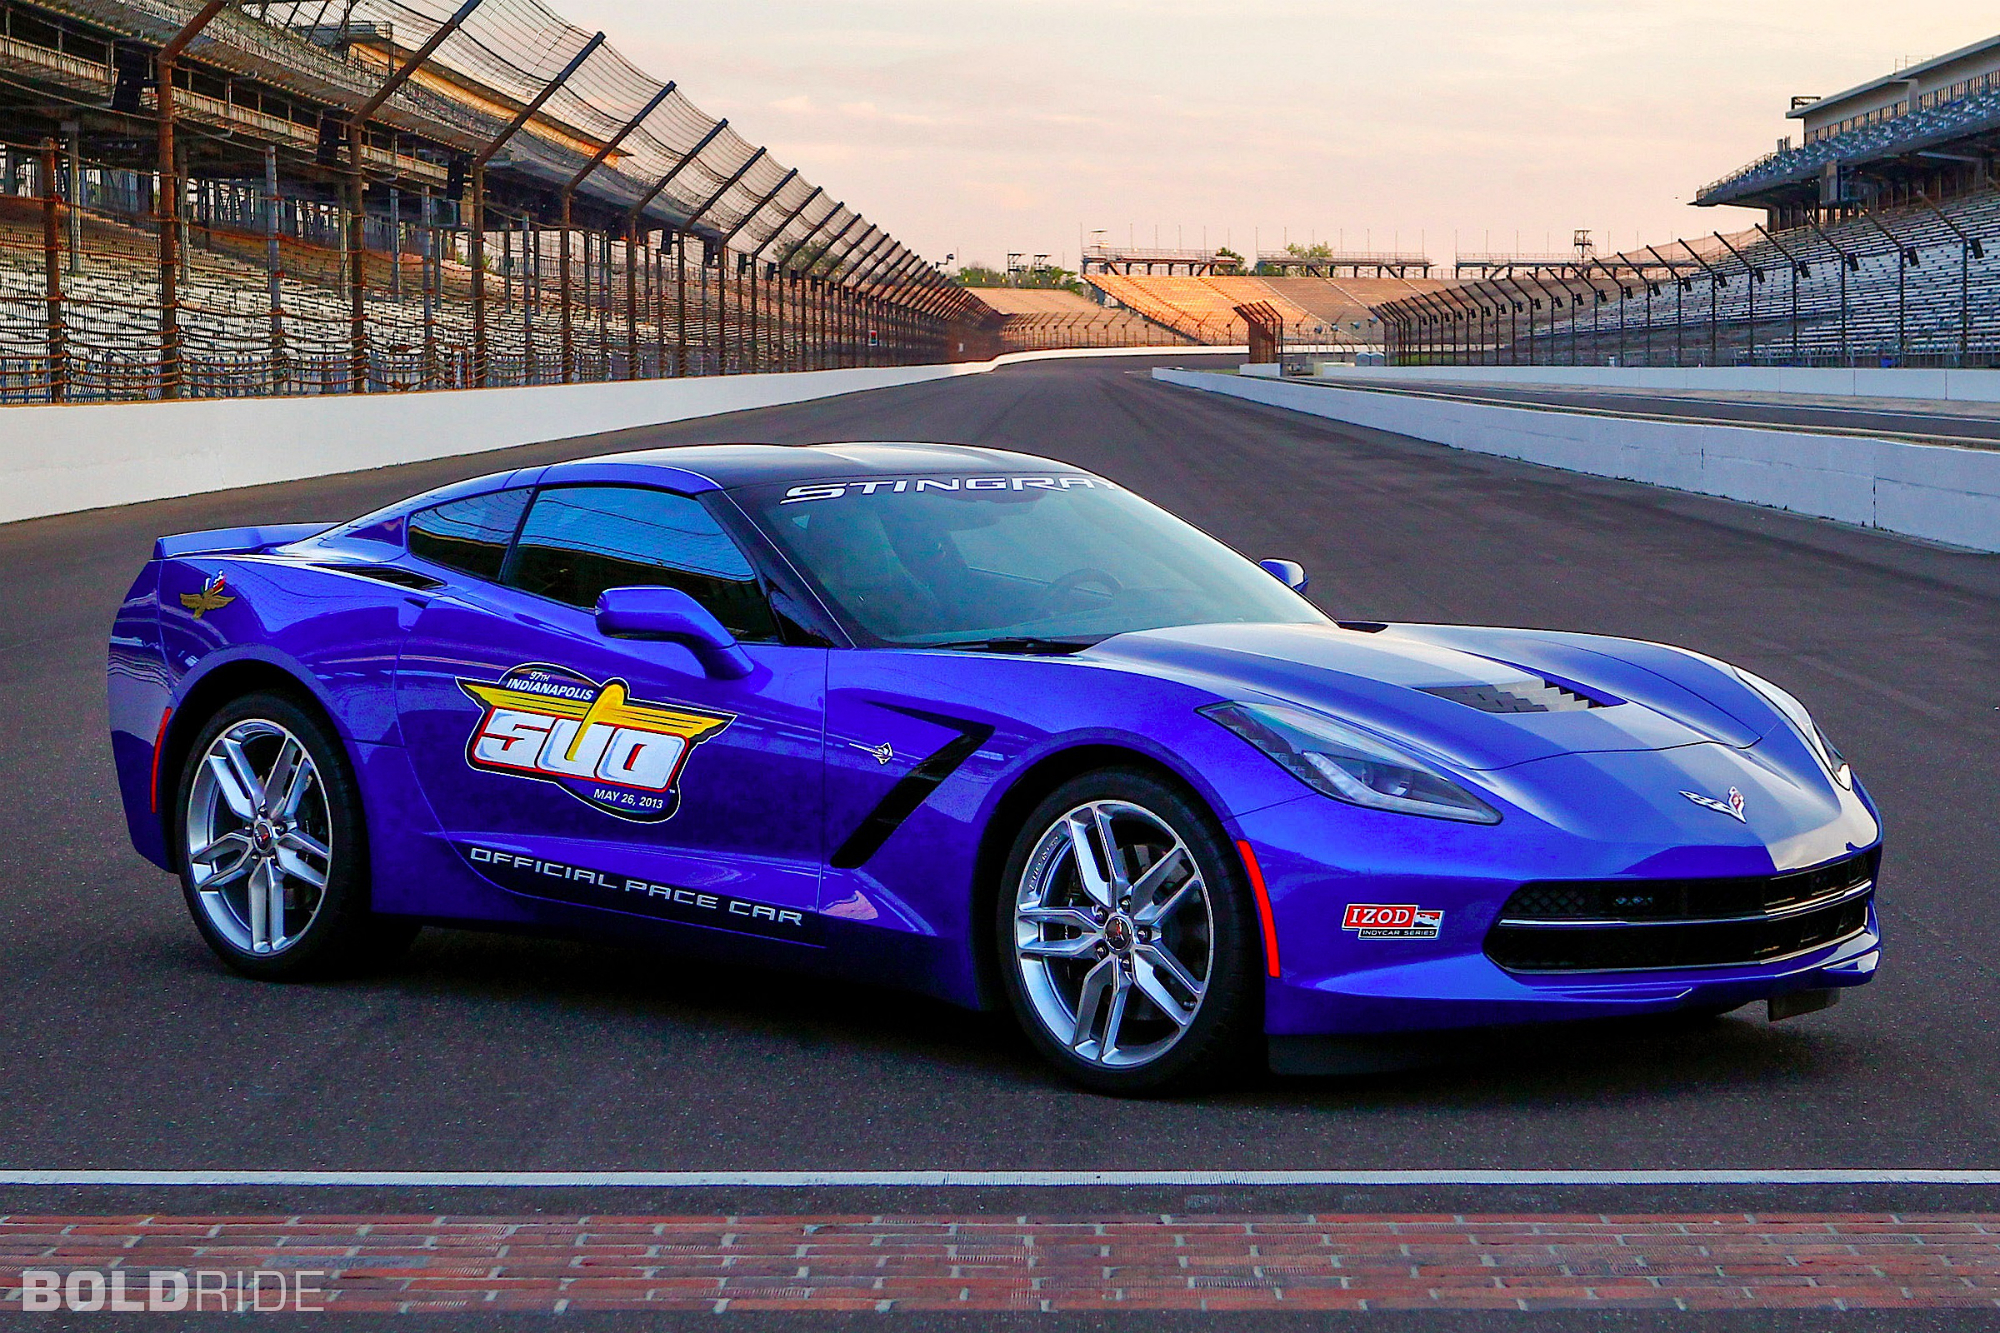 2014, Chevrolet, Corvette, Stingray, Indy, 500, Pace, Supercar, Supercars, Muscle Wallpaper